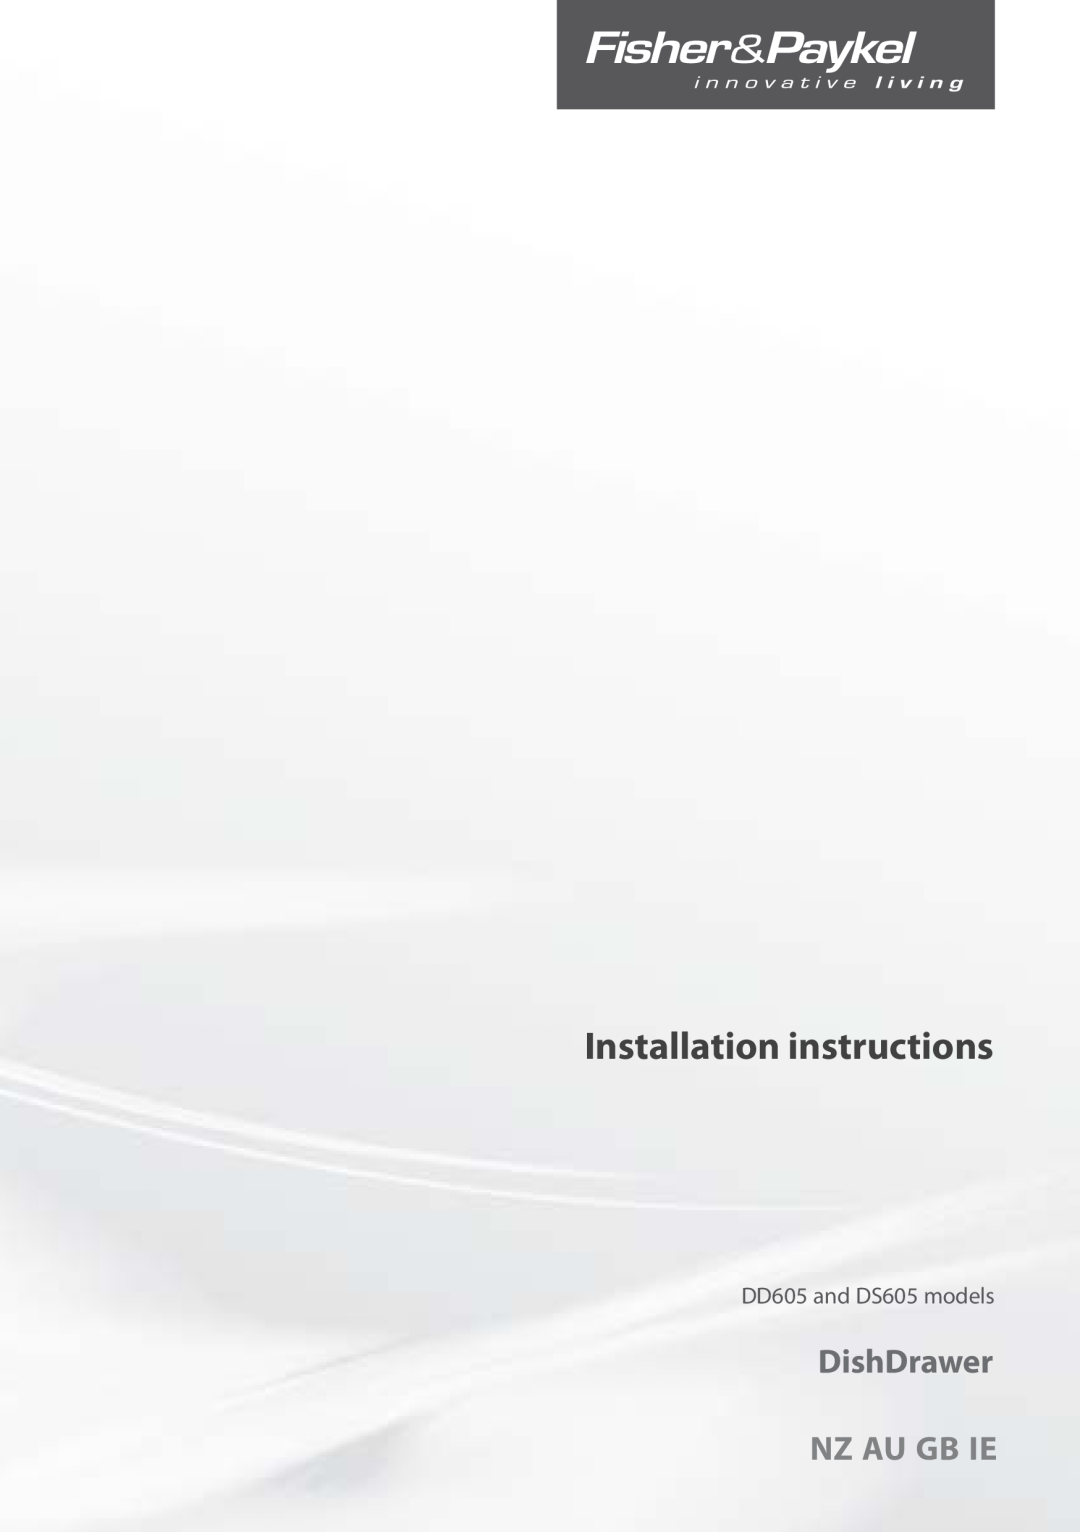 Fisher & Paykel installation instructions Installation instructions, DishDrawer, Nz Au Gb Ie, DD605 and DS605 models 